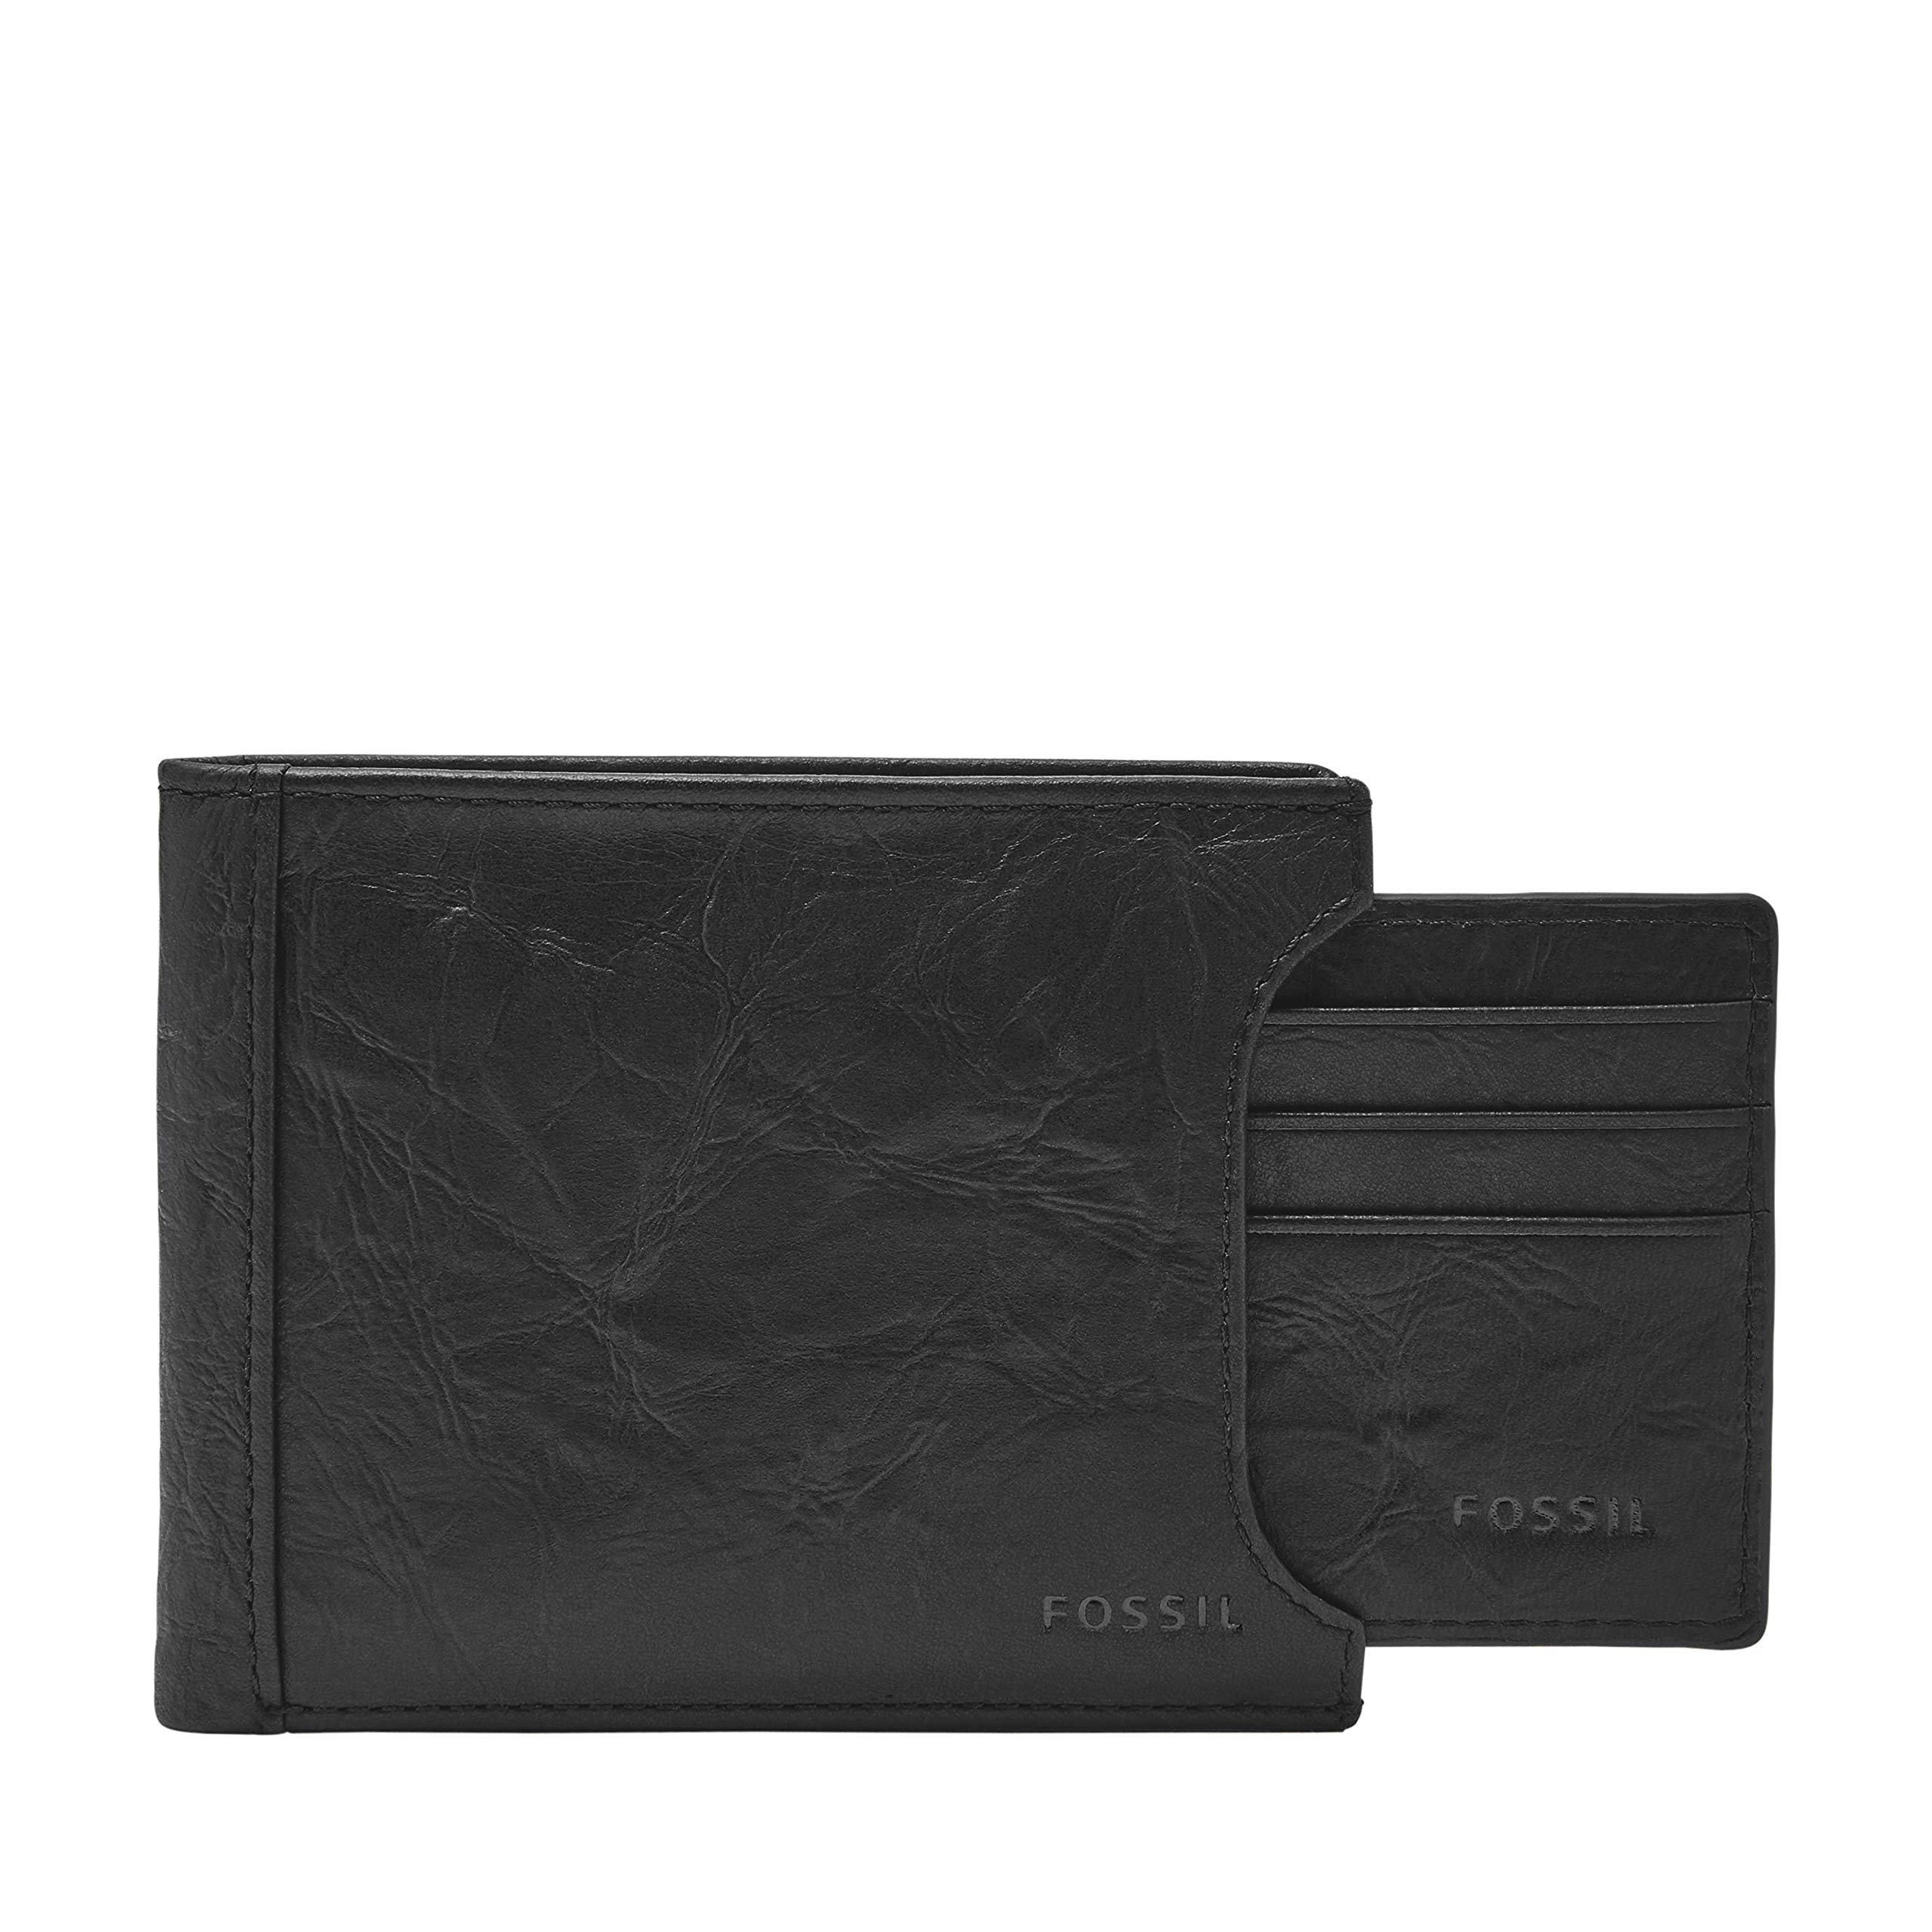 Fossil Men's Leather Bifold Sliding 2-in-1 with Removable Card Case Wallet for Men